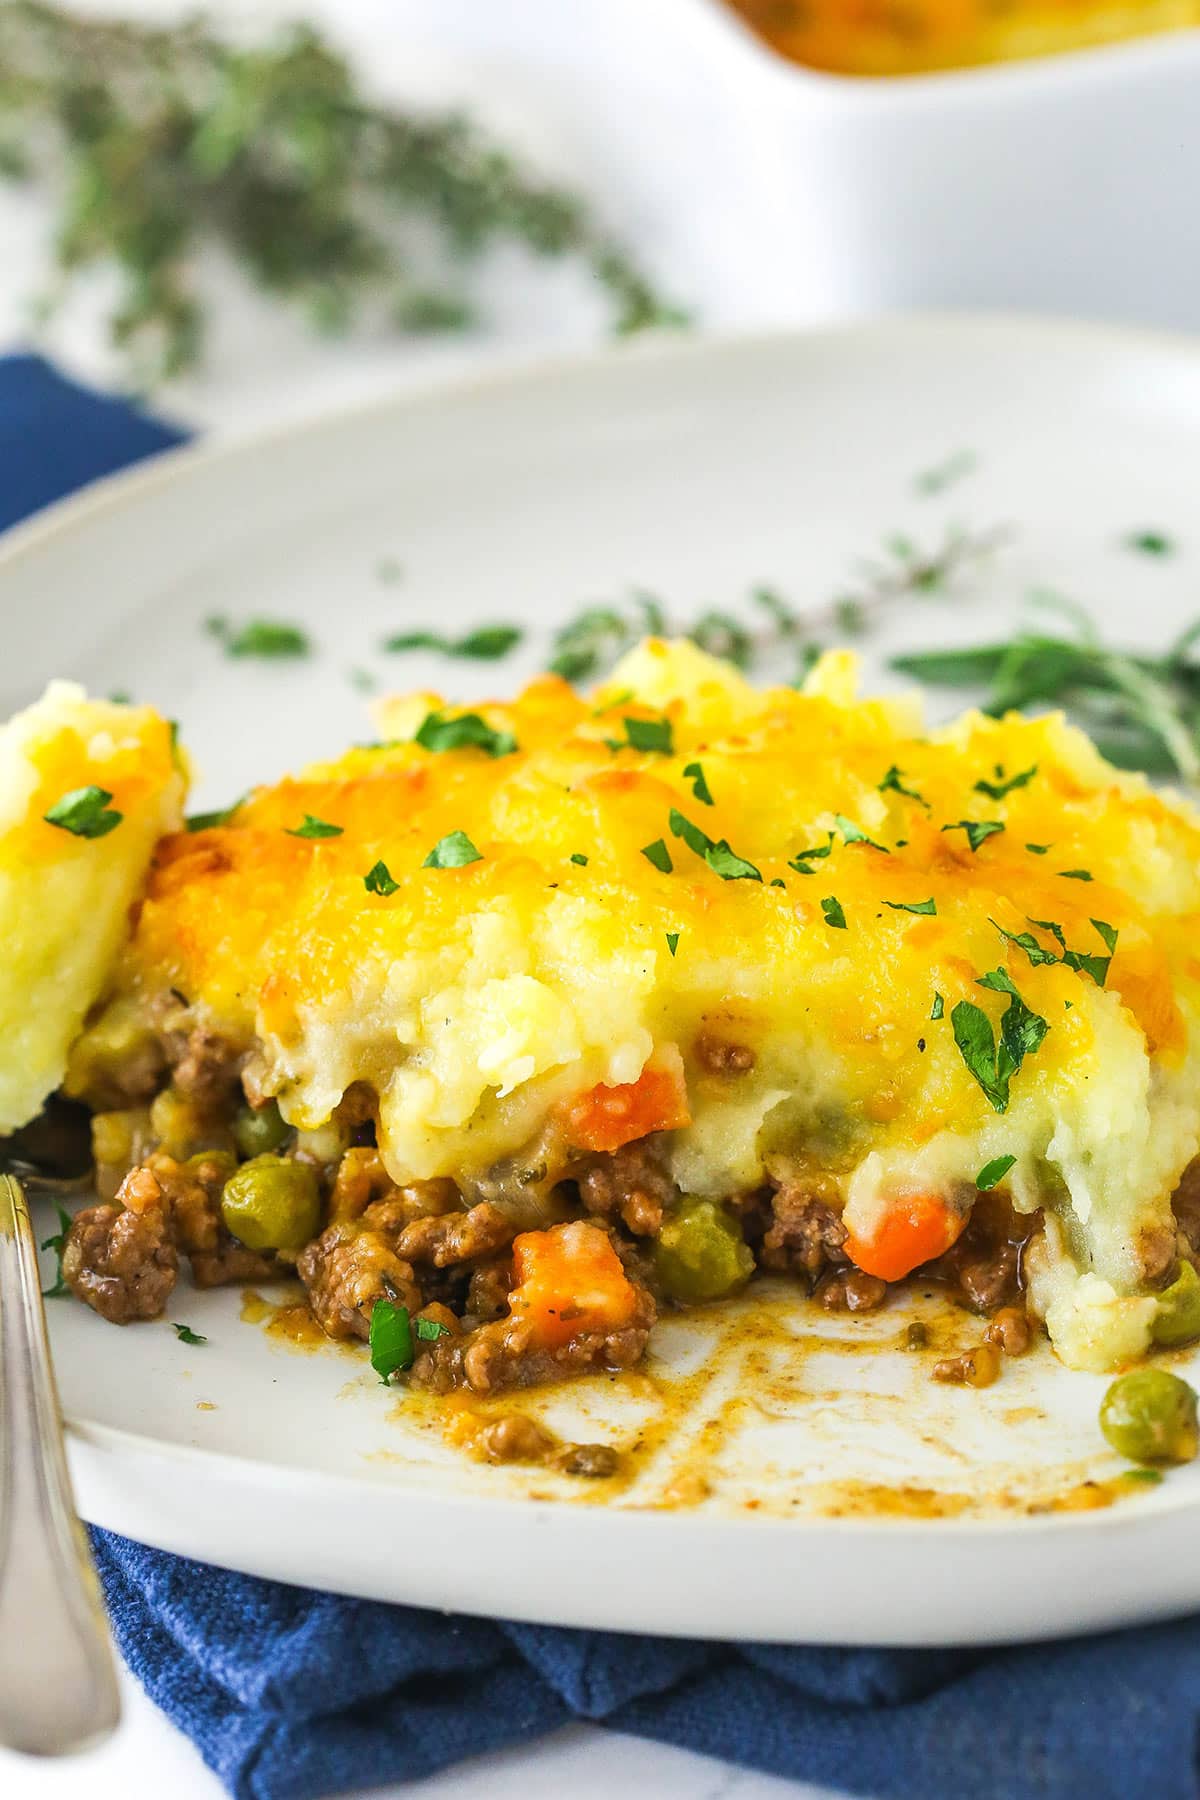 A slice of shepherd's pie on a plate with a bite taken out of it.